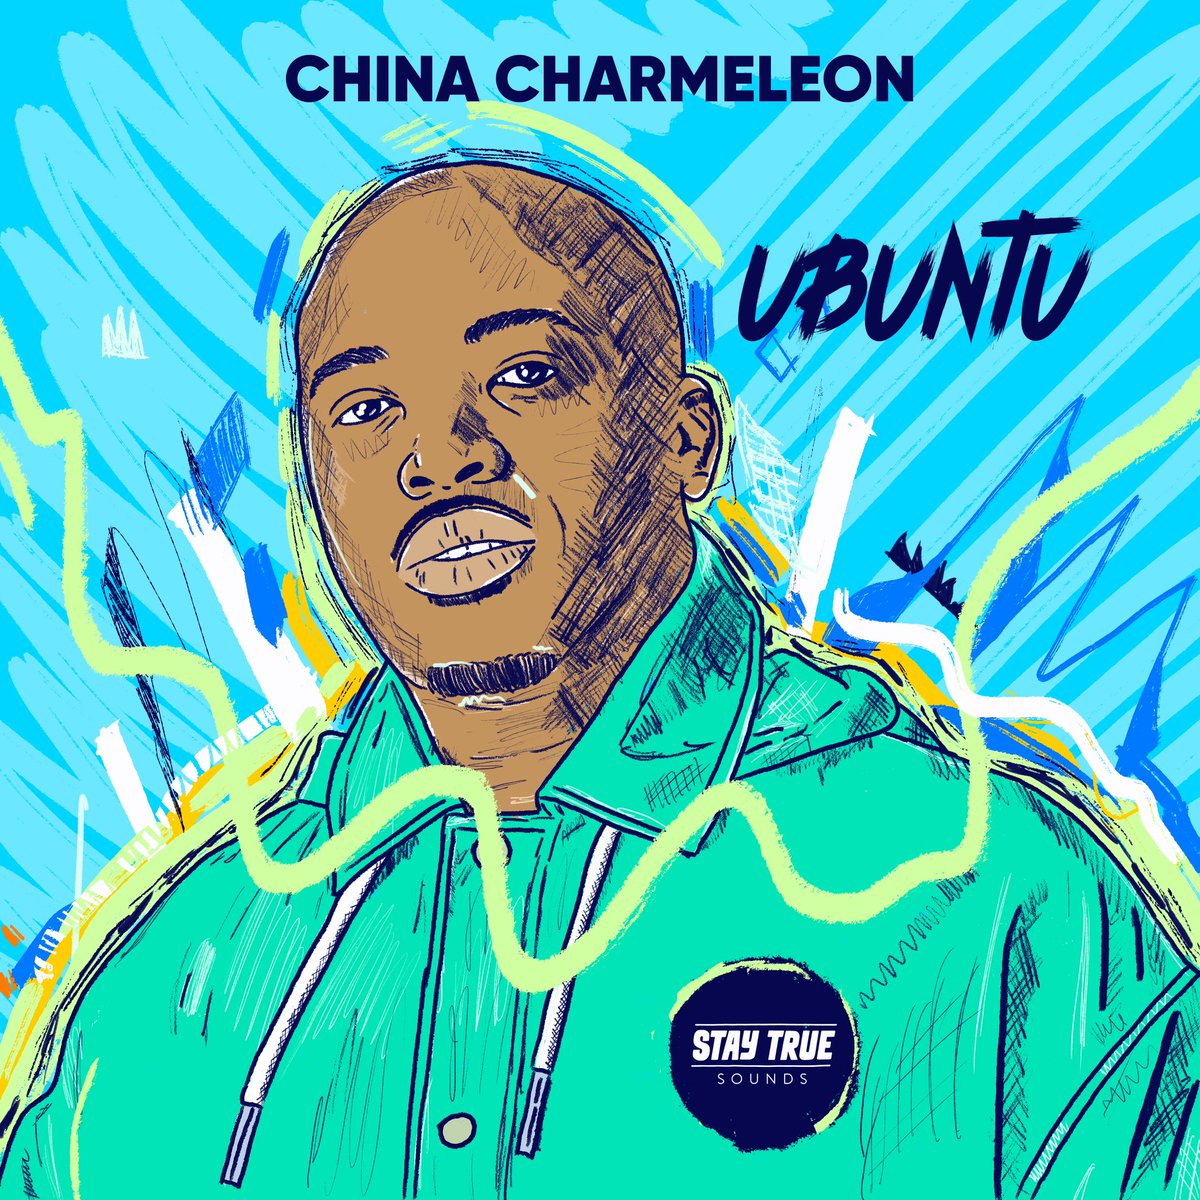 ☄️@CharmeleonChina returns with a 9 track album titled ‘Ubuntu’, a compelling deep🏠 journey from 1 of SA’s🇿🇦 most promising producers featuring @malineaura on the title track✨ Drops Friday 29/03/24 🗓️🌍 Pre-save 🔗 in👉🏼 staytruesounds.lnk.to/STS181 #deephouse #staytruesounds